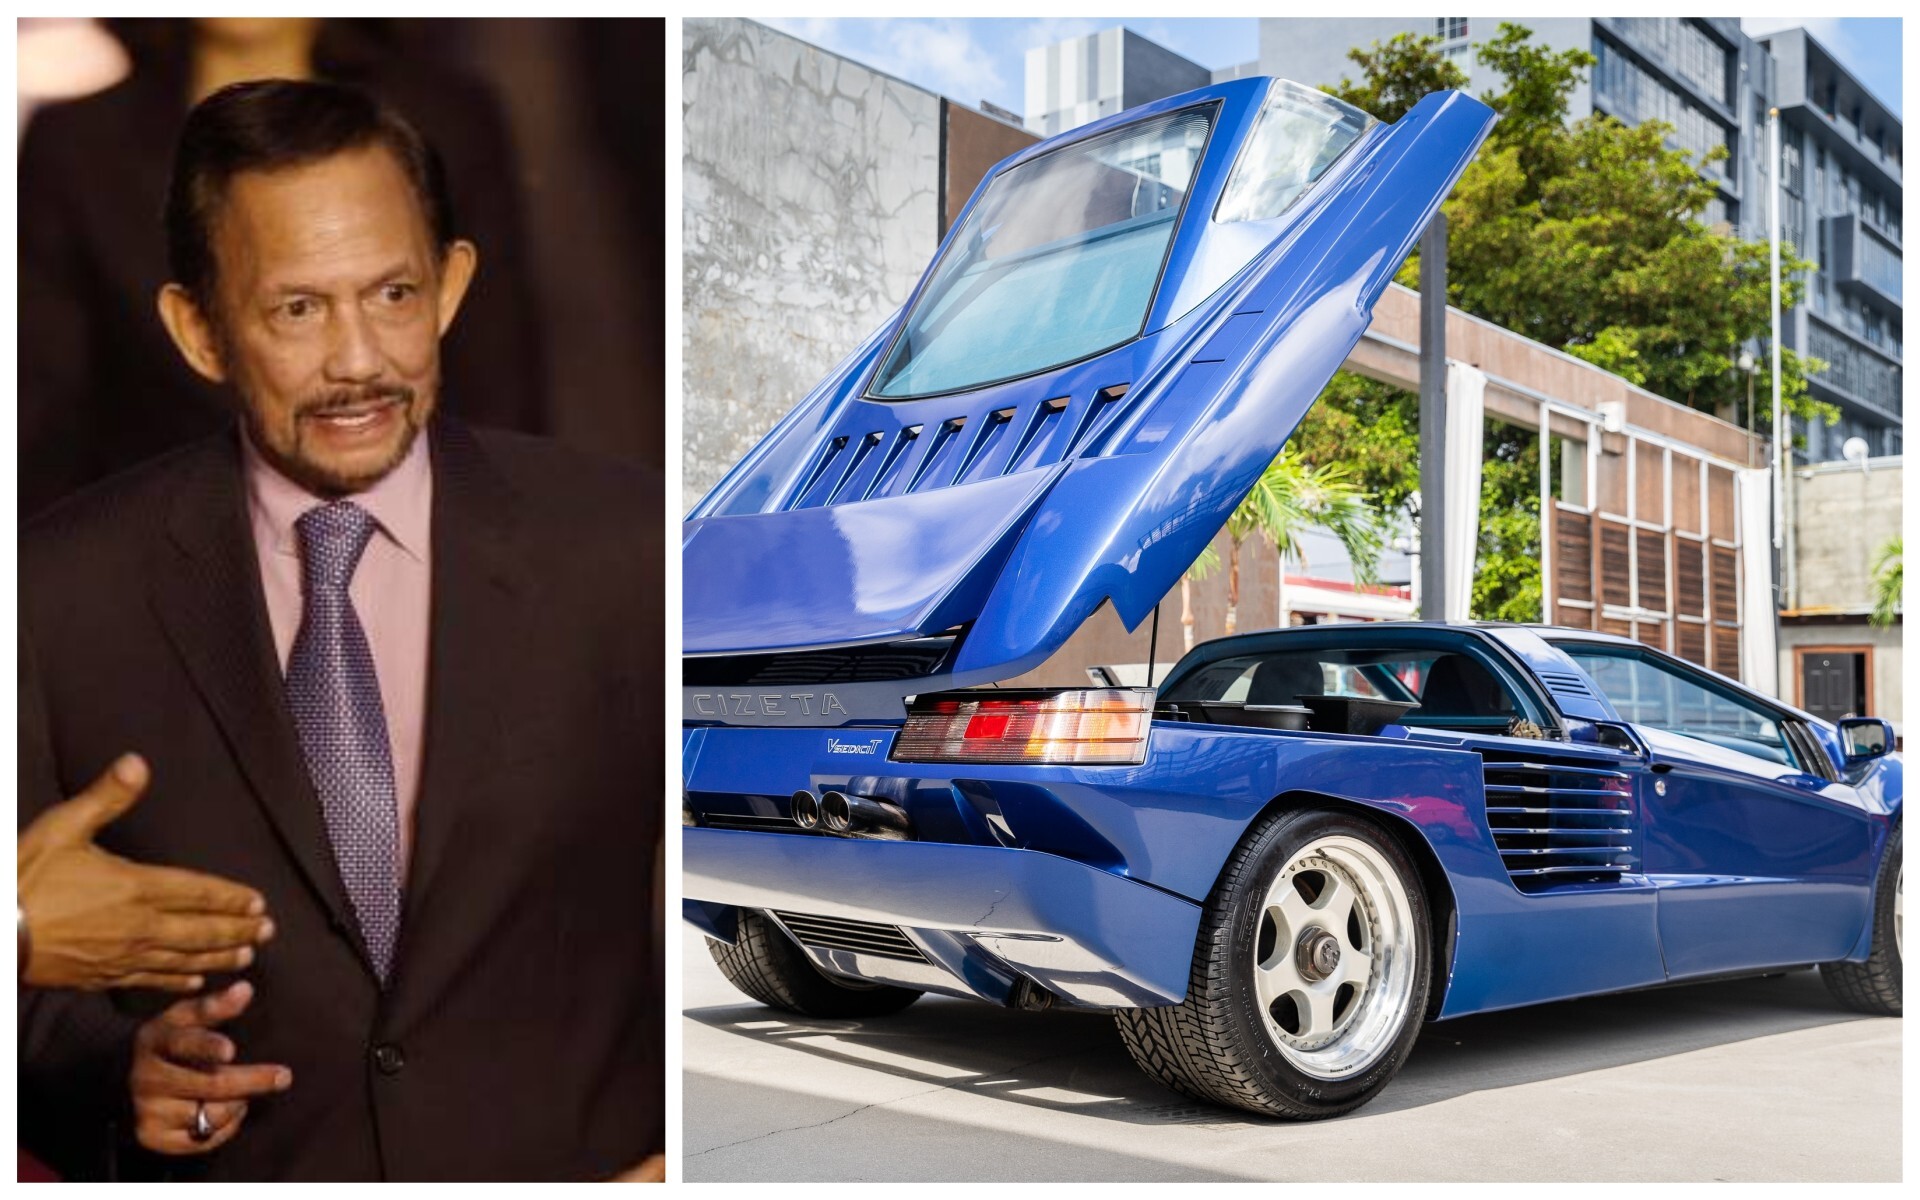 The Sultan of Brunei and his 1993 Cizeta V16T supercar, now on sale for more than US$700,000. Photos: @HassanalBolkia4/Twitter, Curated